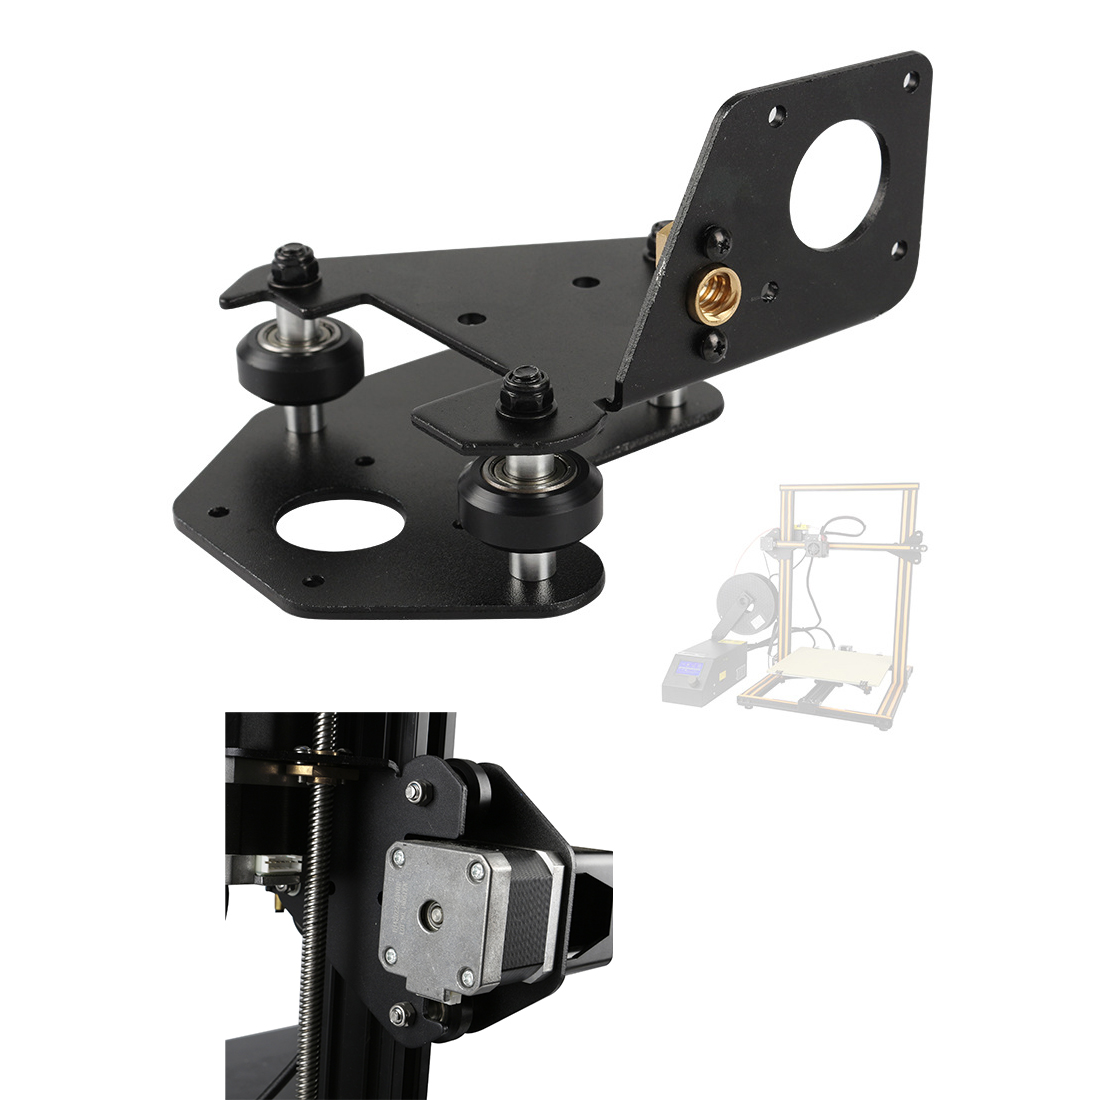 

S4/S5 Left X-Axis Motor Mount Bracket Plate with Pulley & T8 Nut for CR-10 Creality 3D Printer Part